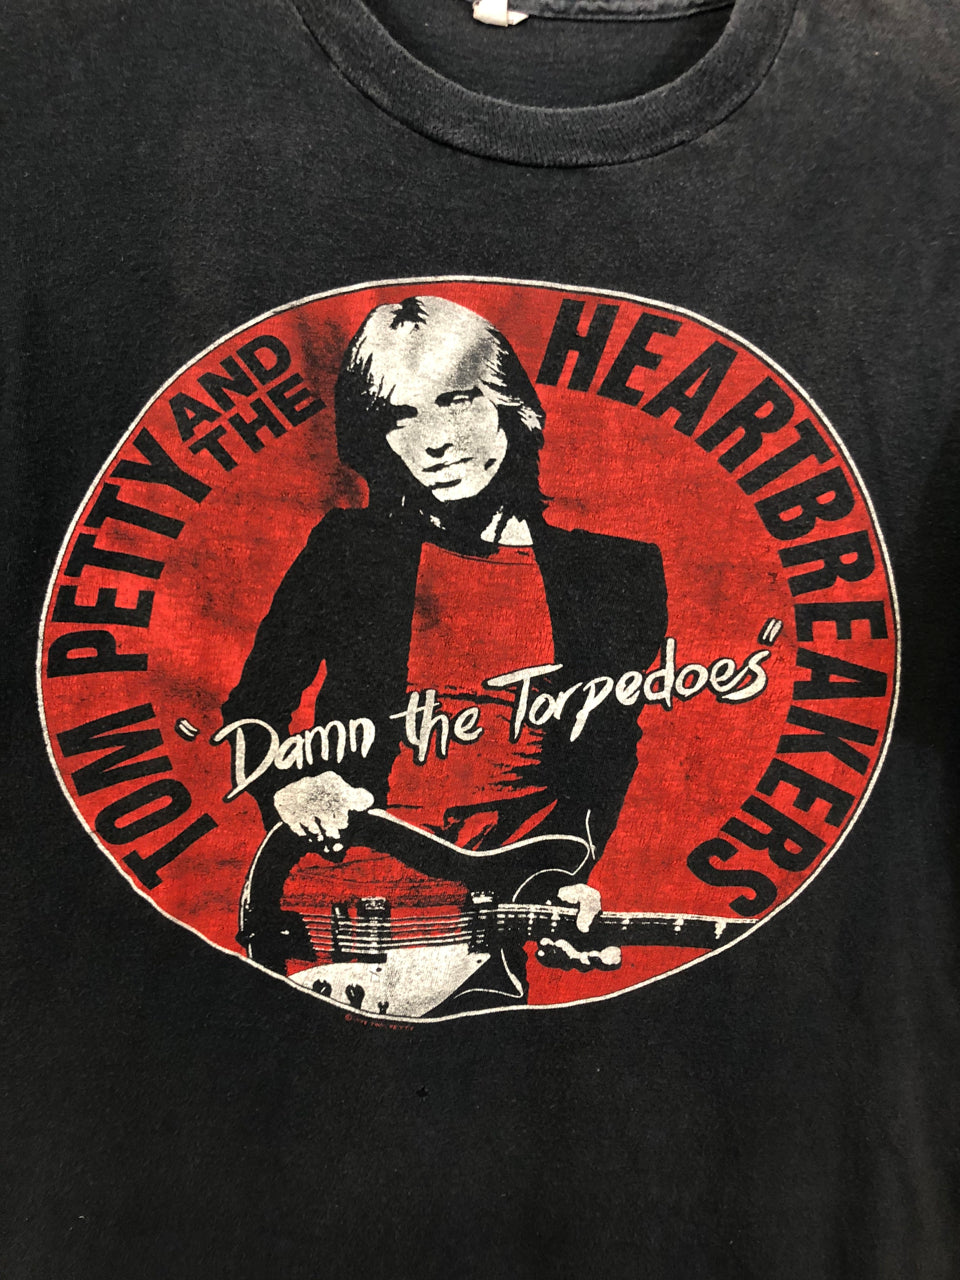 Tom Petty and the Heartbreakers "Damn The Torpedoes" Tour 1979-1980 T-Shirt